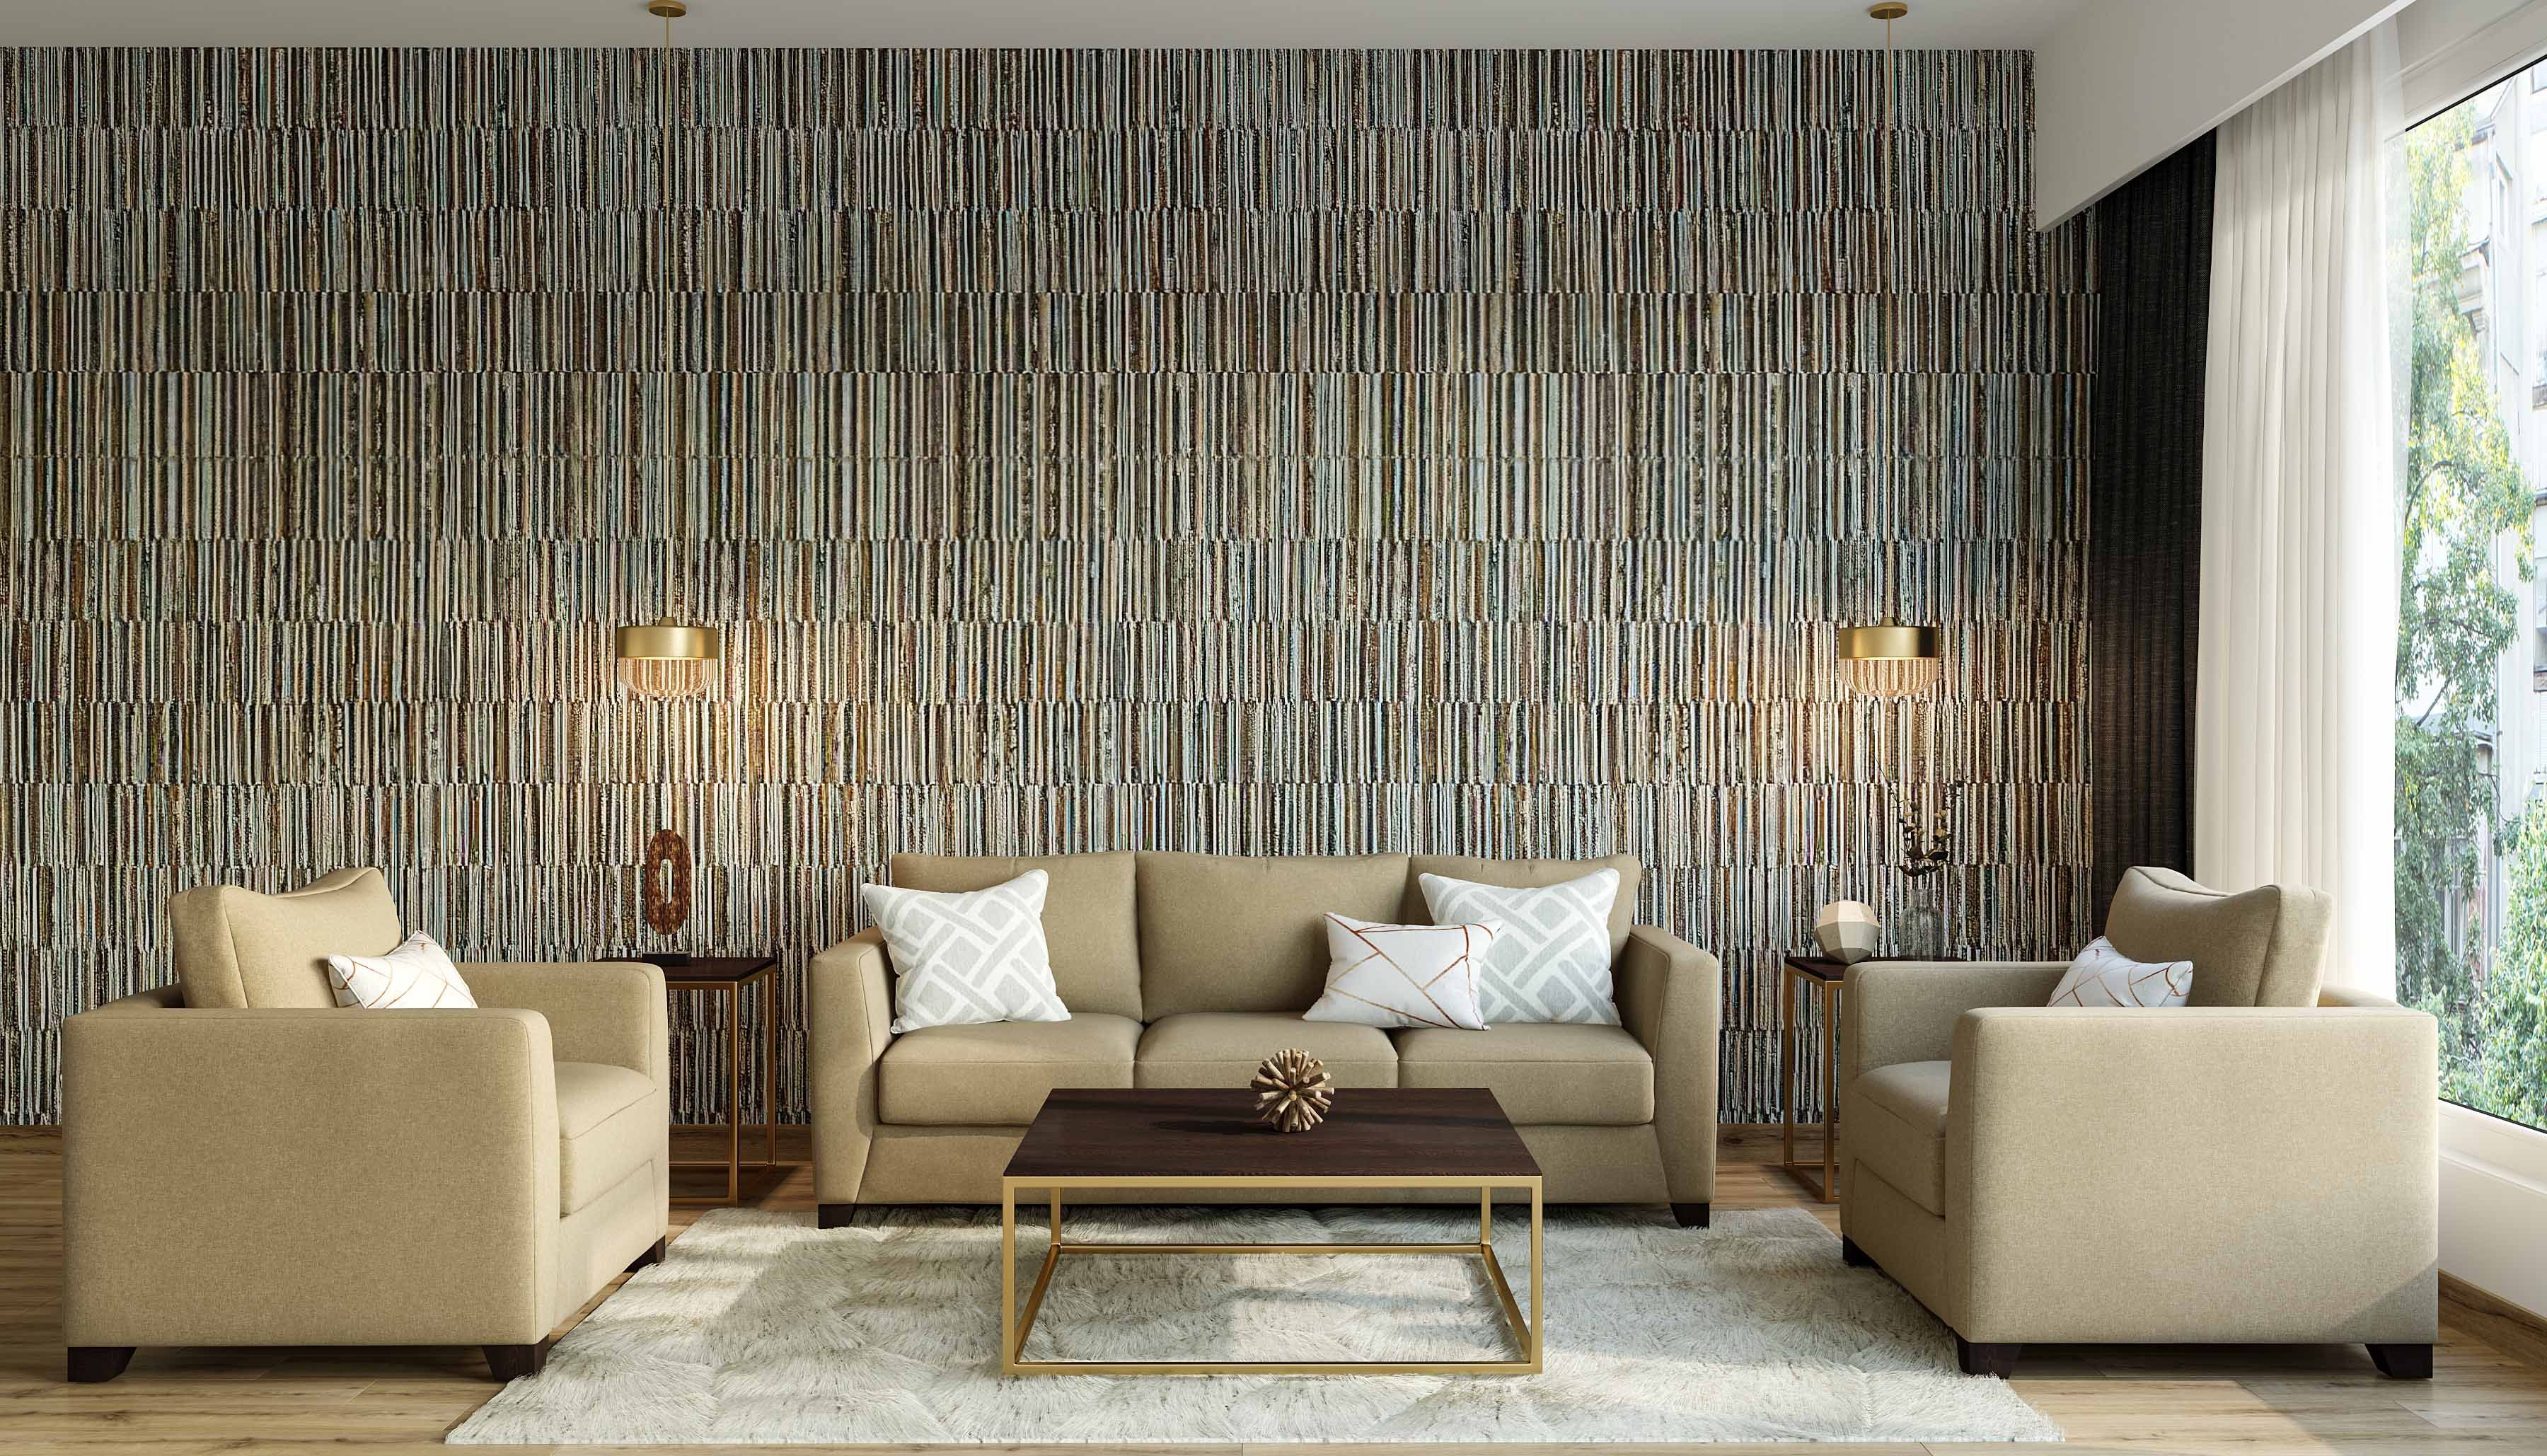 Modern Living Room Wallpaper Design With A Striped Pattern